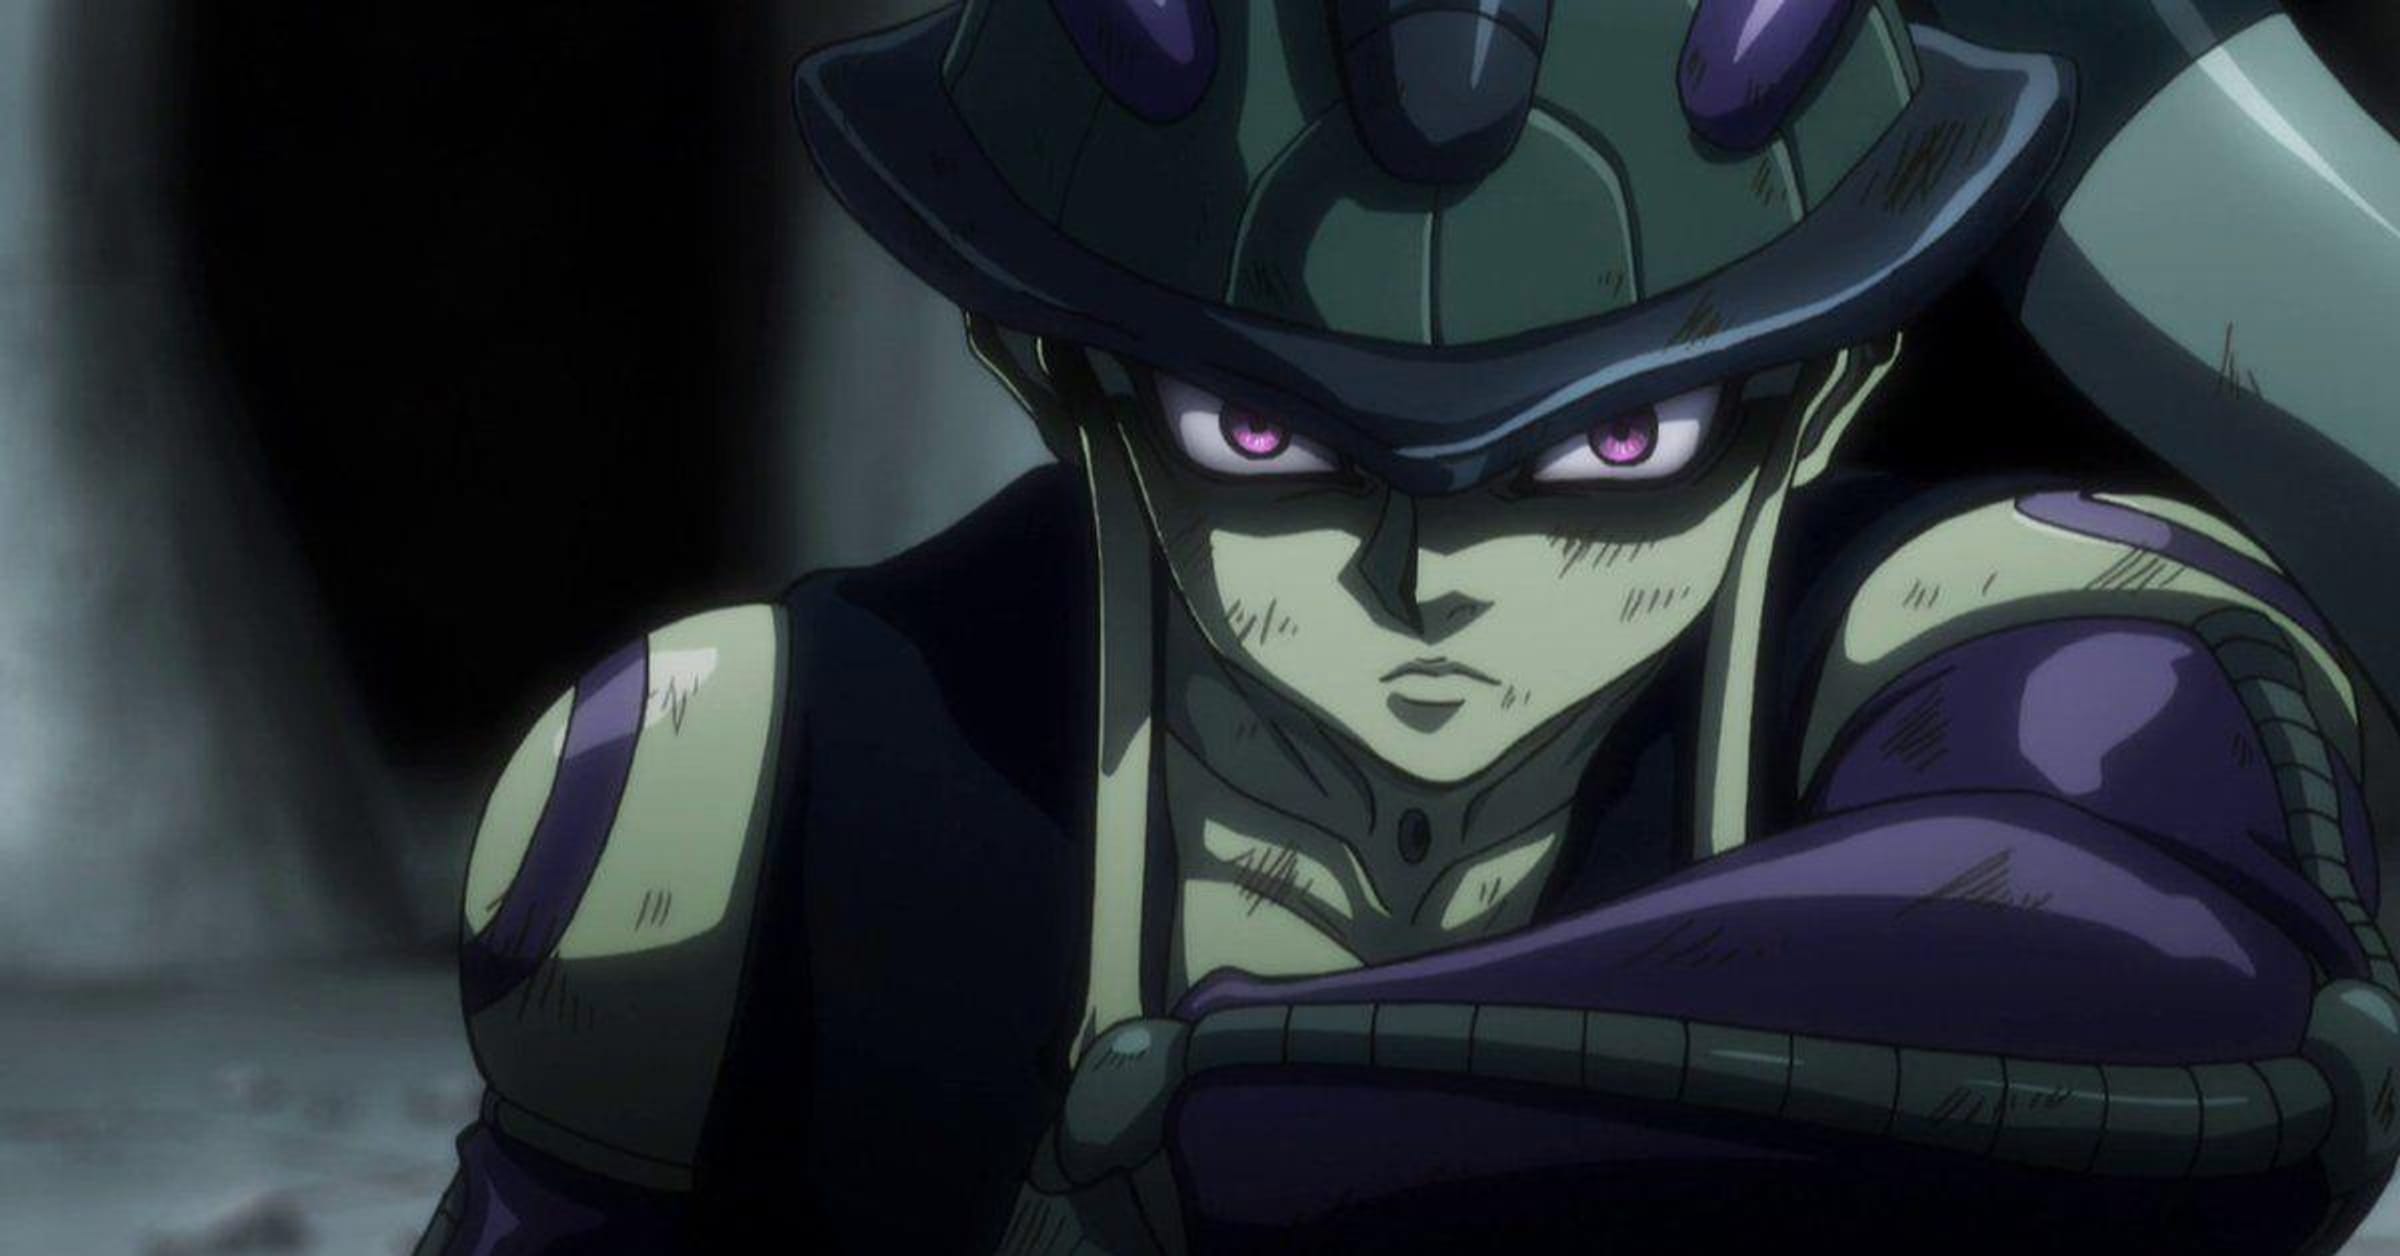 The 20 Strongest 'Hunter x Hunter' Characters, Ranked